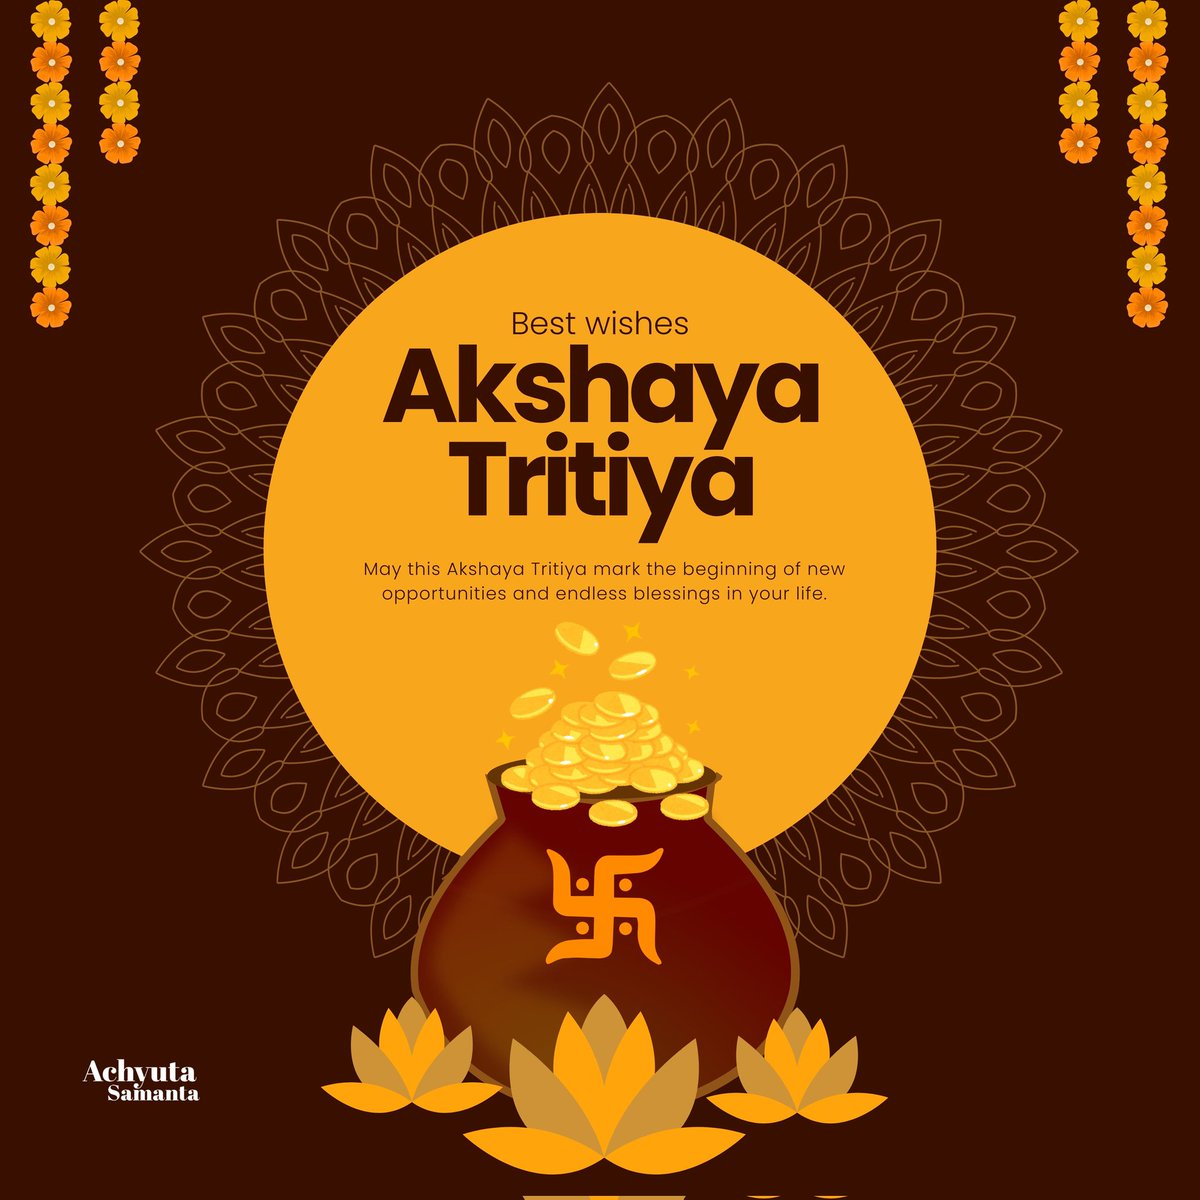 On this auspicious occasion of Akshaya Tritiya, may prosperity and blessings flow endlessly into your lives. Let us embrace this day with gratitude and positivity, nurturing our hopes and aspirations for a brighter tomorrow. Wishing everyone a blessed Akshaya Tritiya!